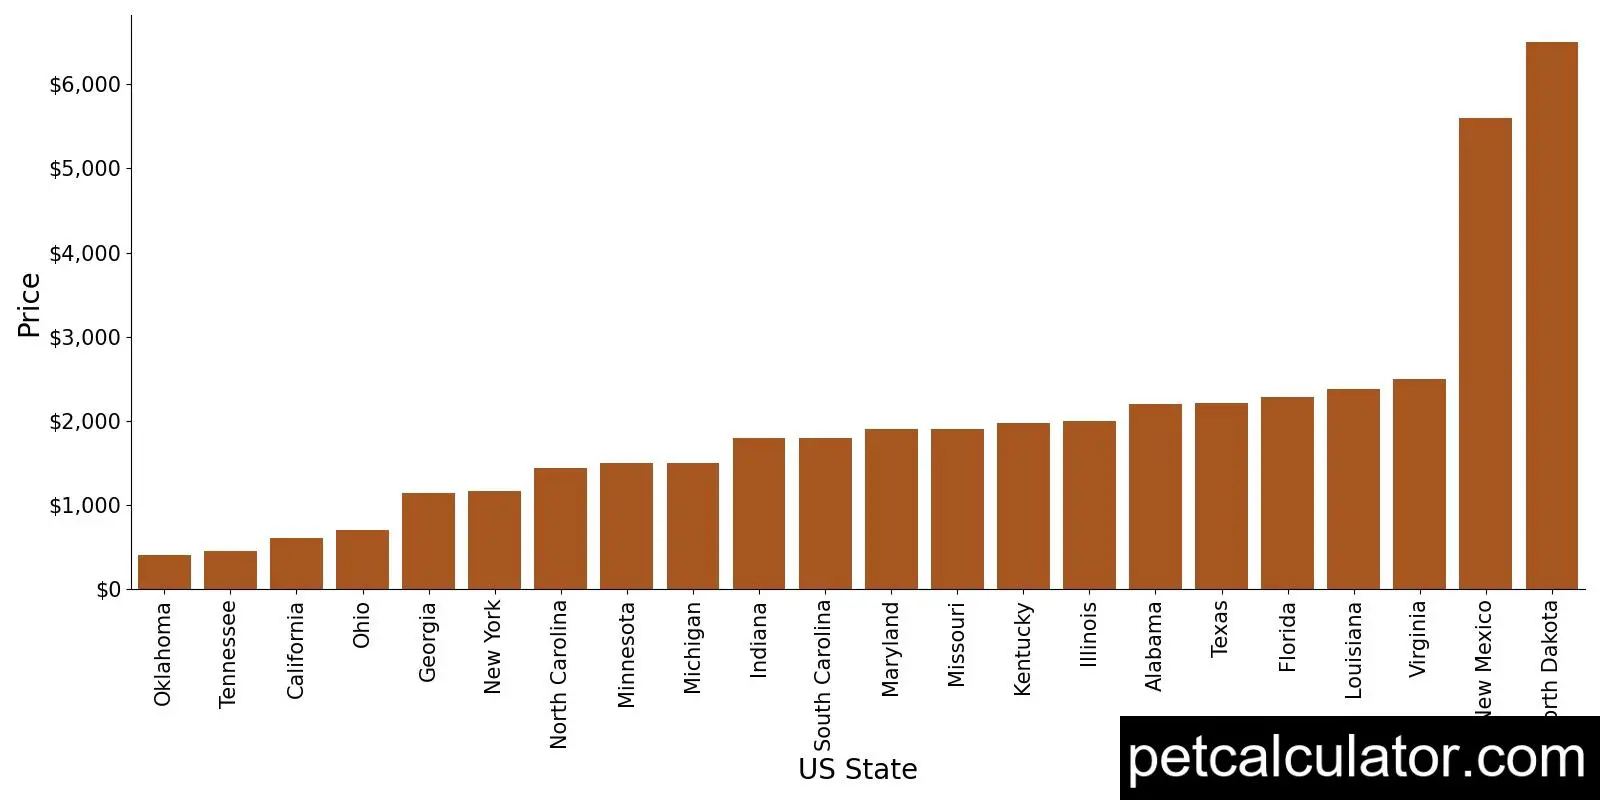 Price of Staffordshire Bull Terrier by US State 